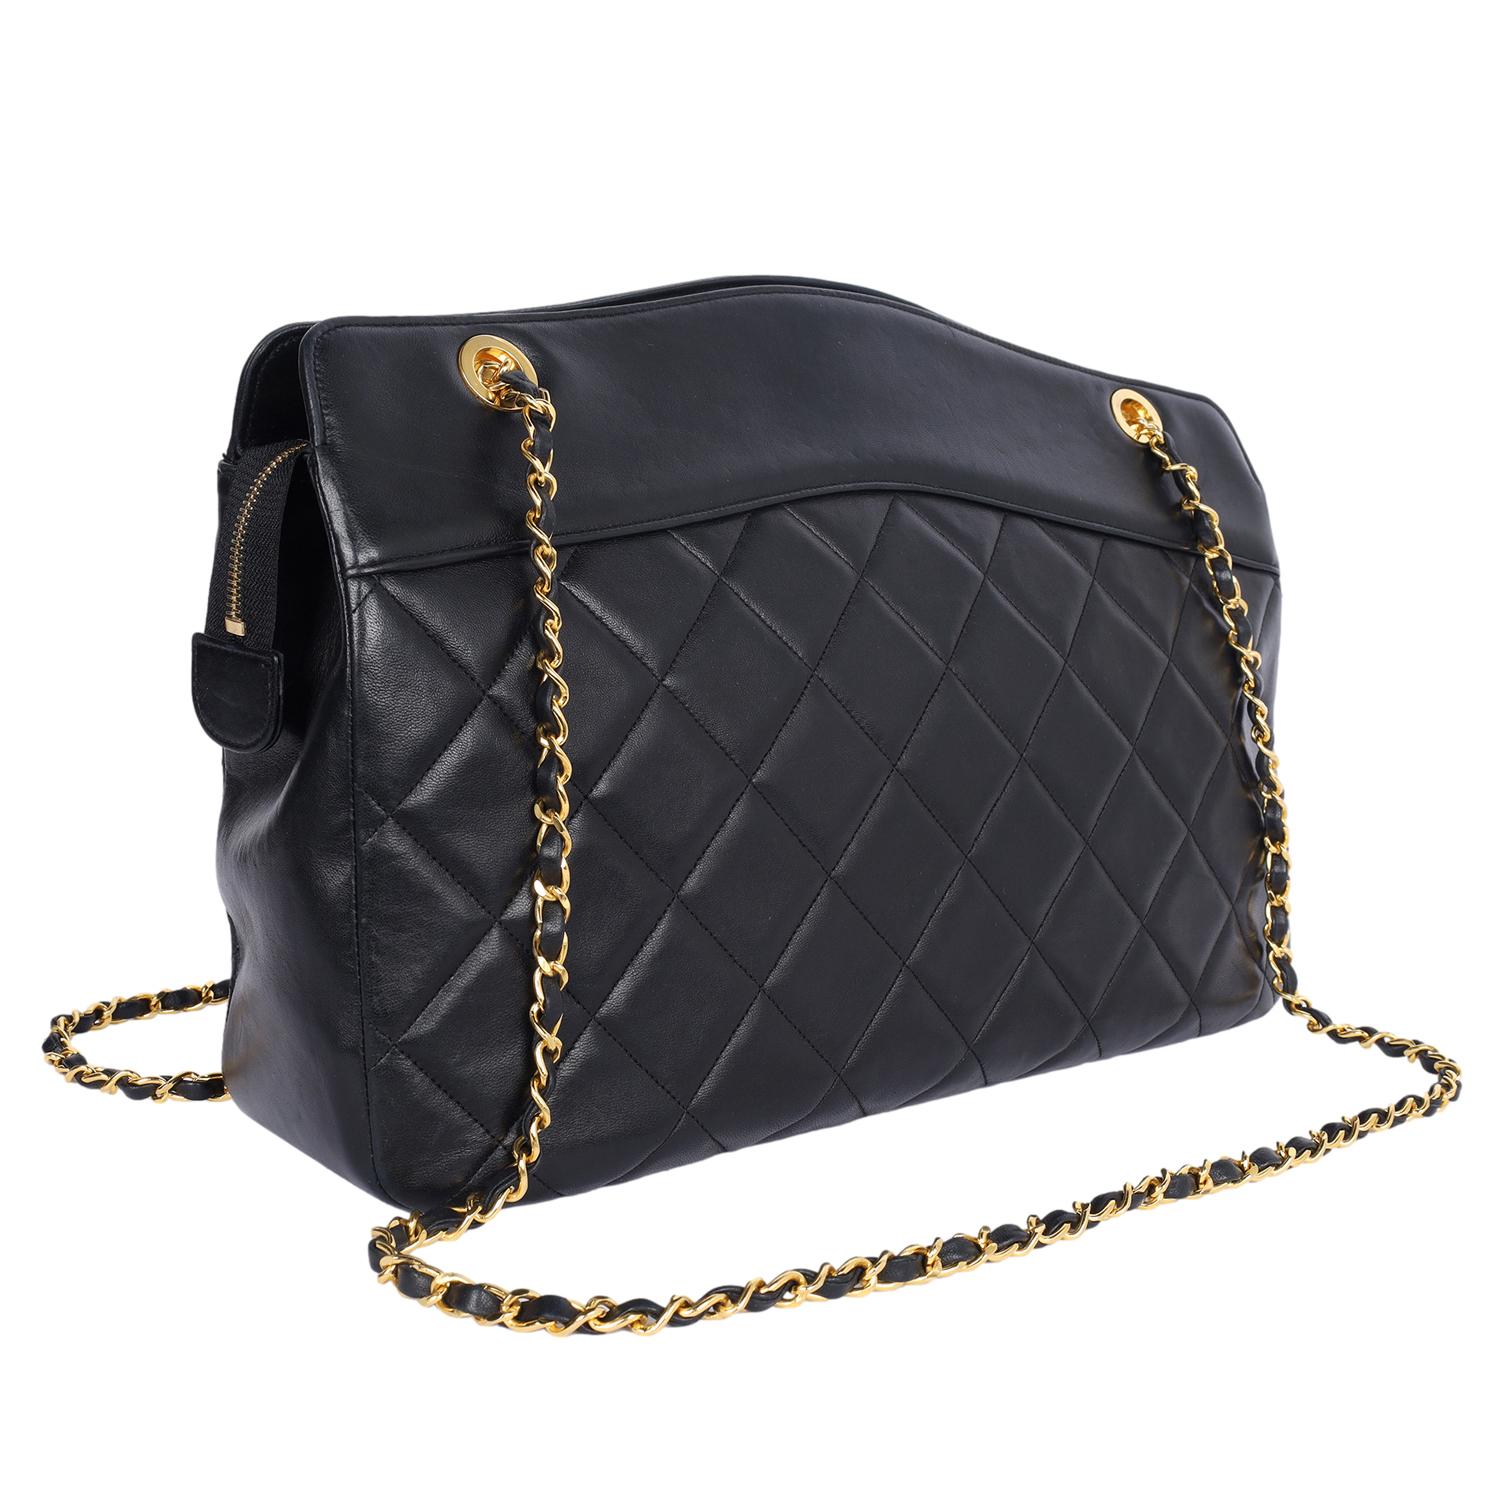 Chanel Black Quilted Lambskin Leather Crossbody Bag 1989 For Sale 5